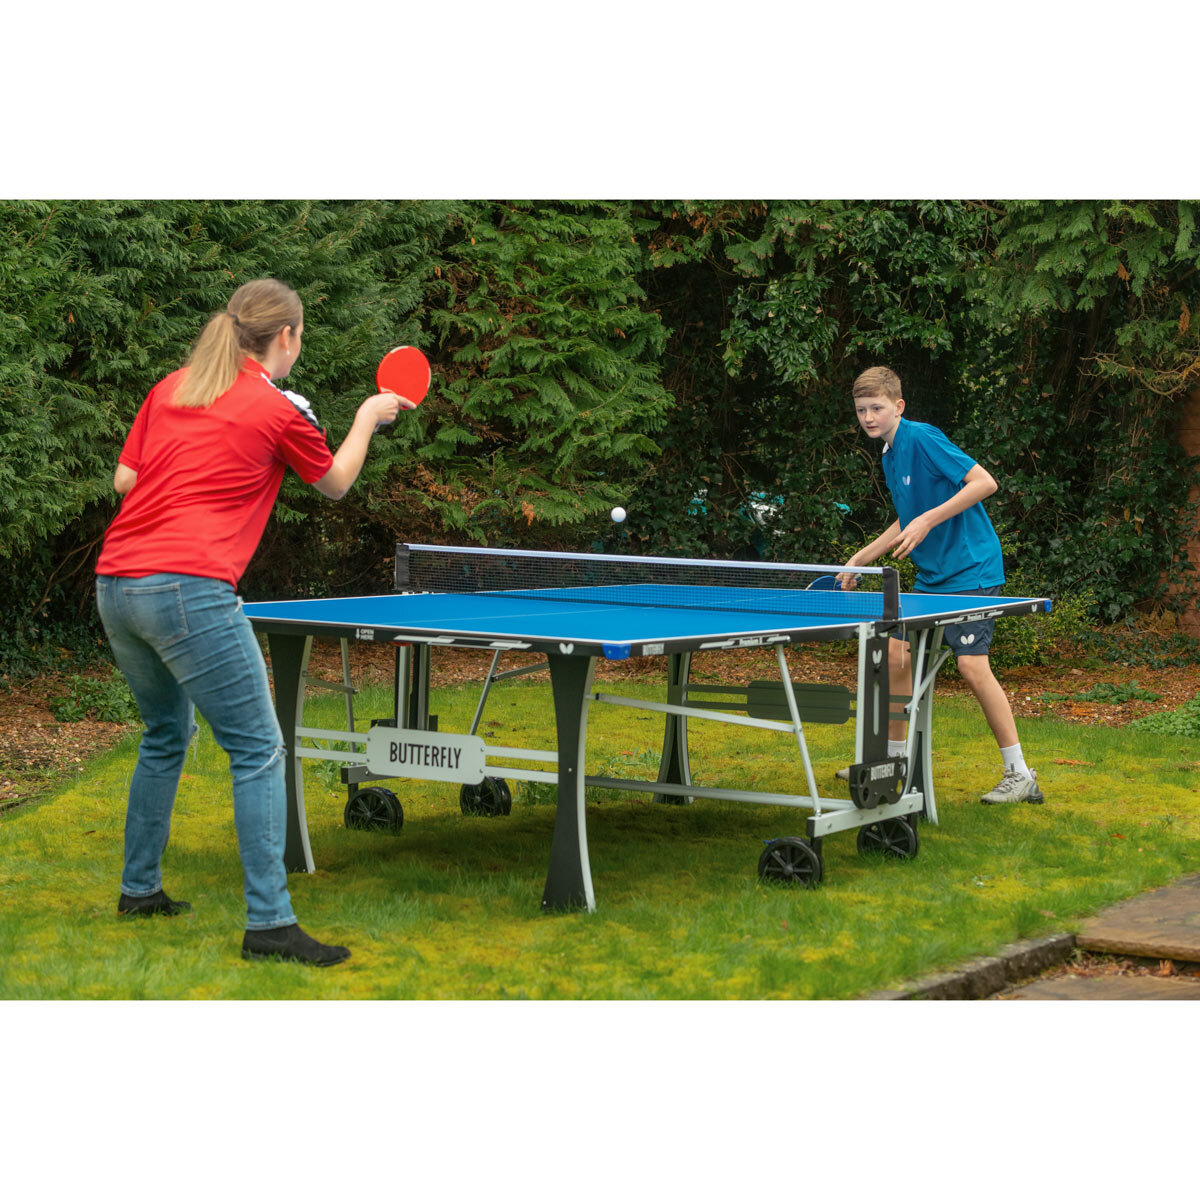 Butterfly Premium 5 Outdoor Table Tennis Table Costco UK